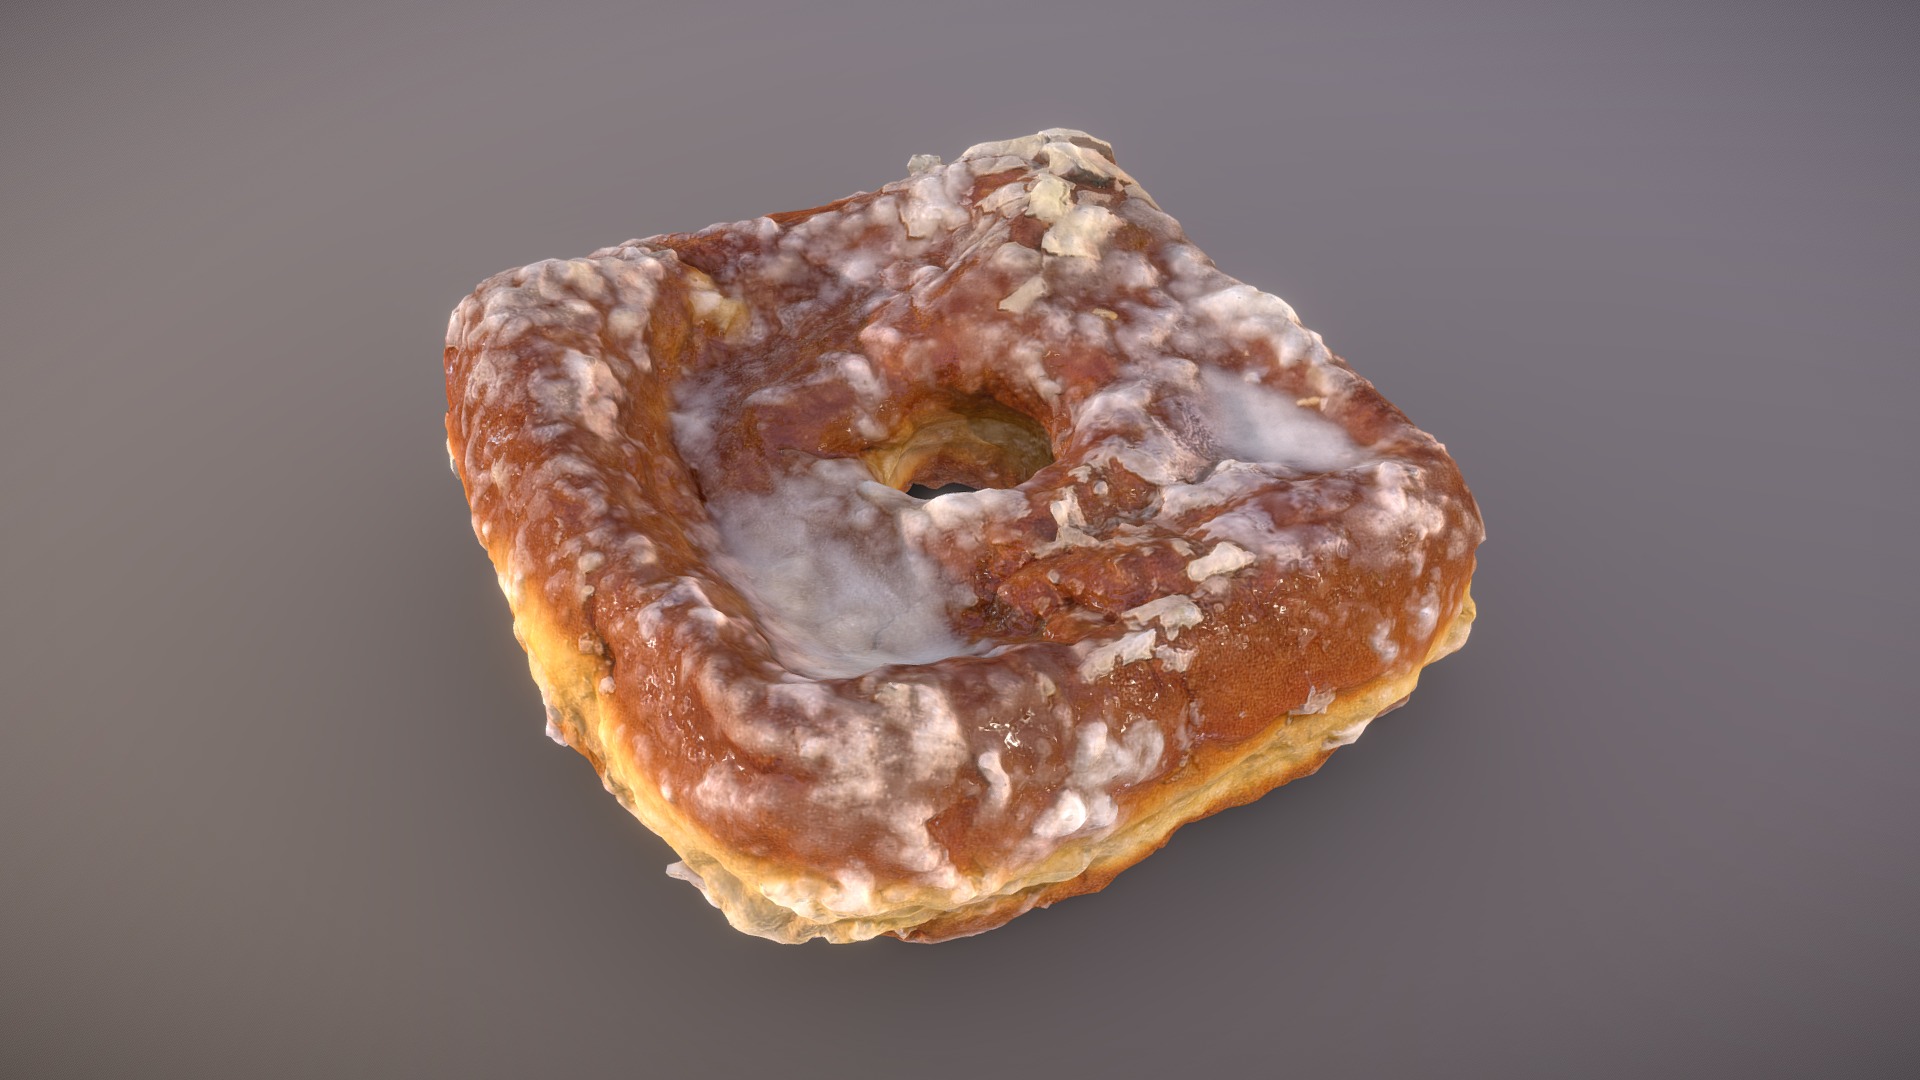 3D model Doughnut Plant Coconut Cream - This is a 3D model of the Doughnut Plant Coconut Cream. The 3D model is about a donut with a bite taken out of it.